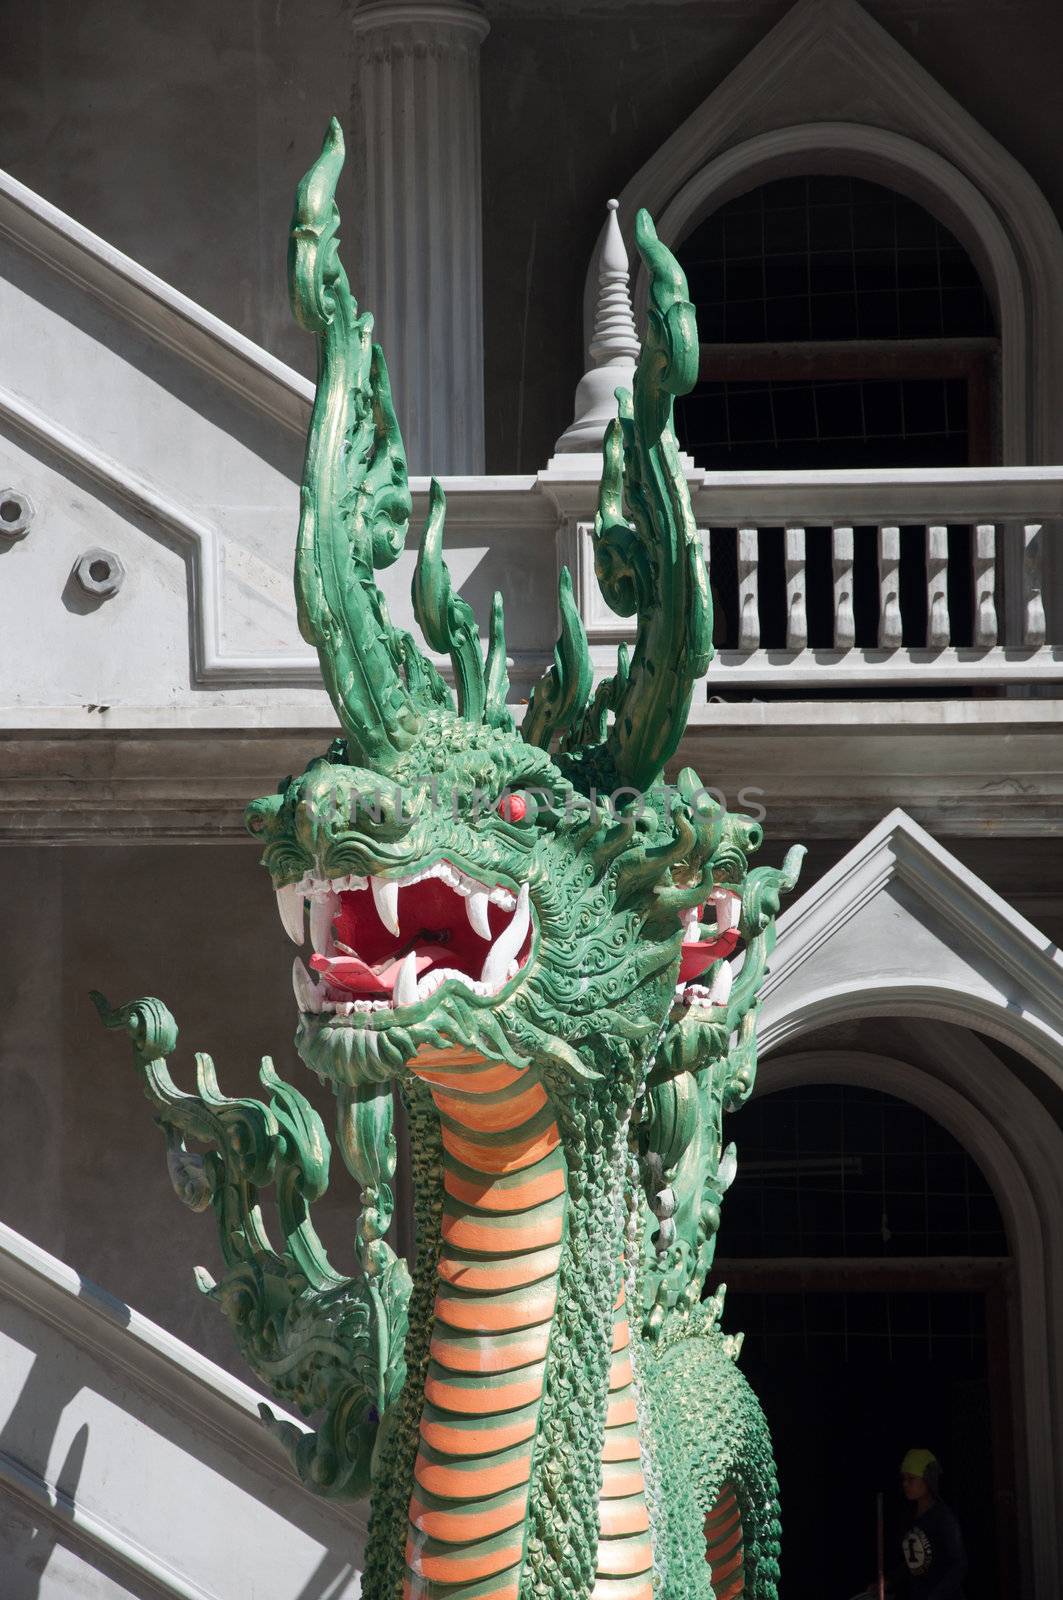 dragon head statue at tiger cave temple krabi, thailand by ngarare